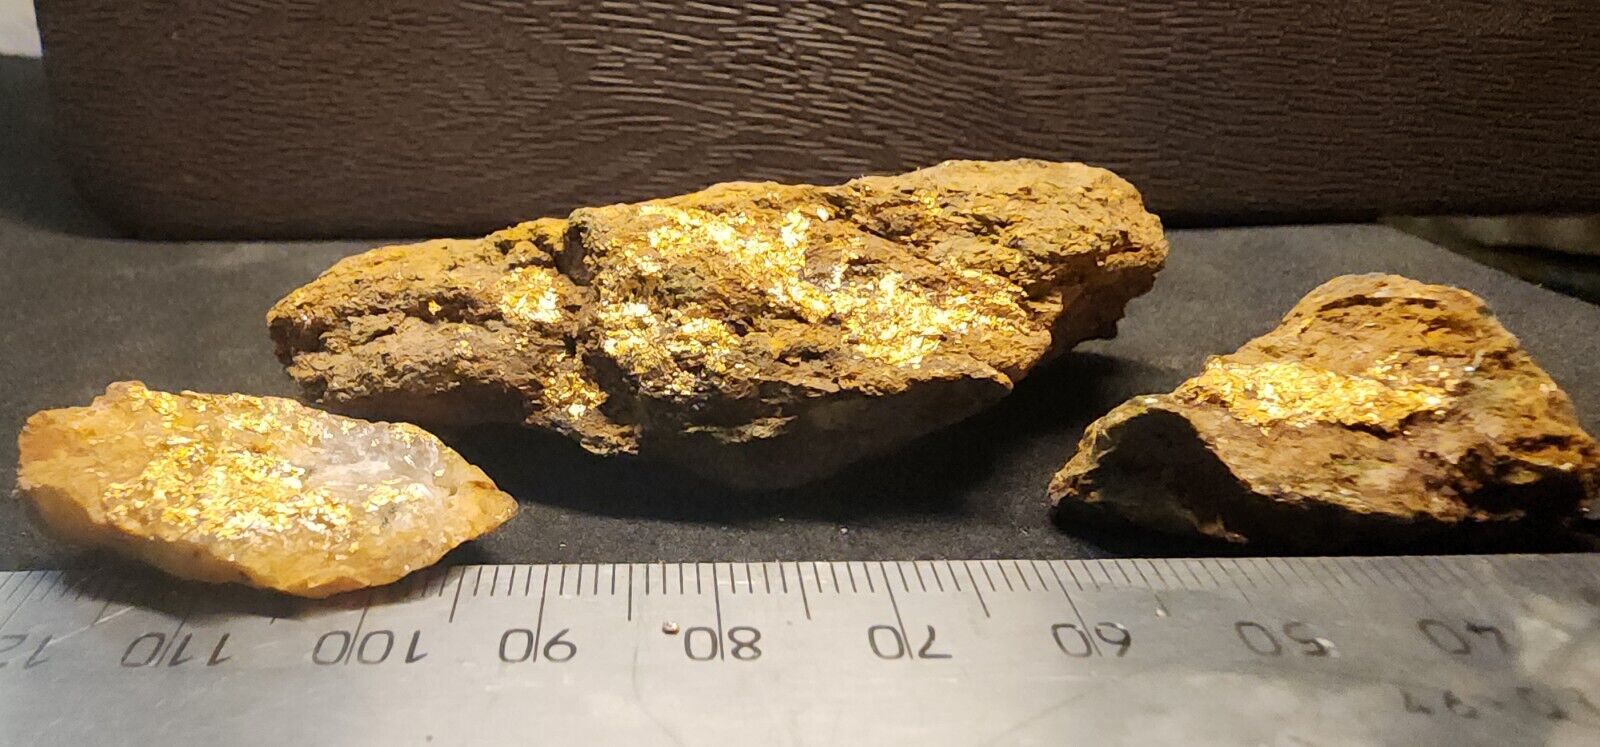 3 Gold Ore Specimens 60.4g Crystalline Gold From Ontario 3671 Was $169